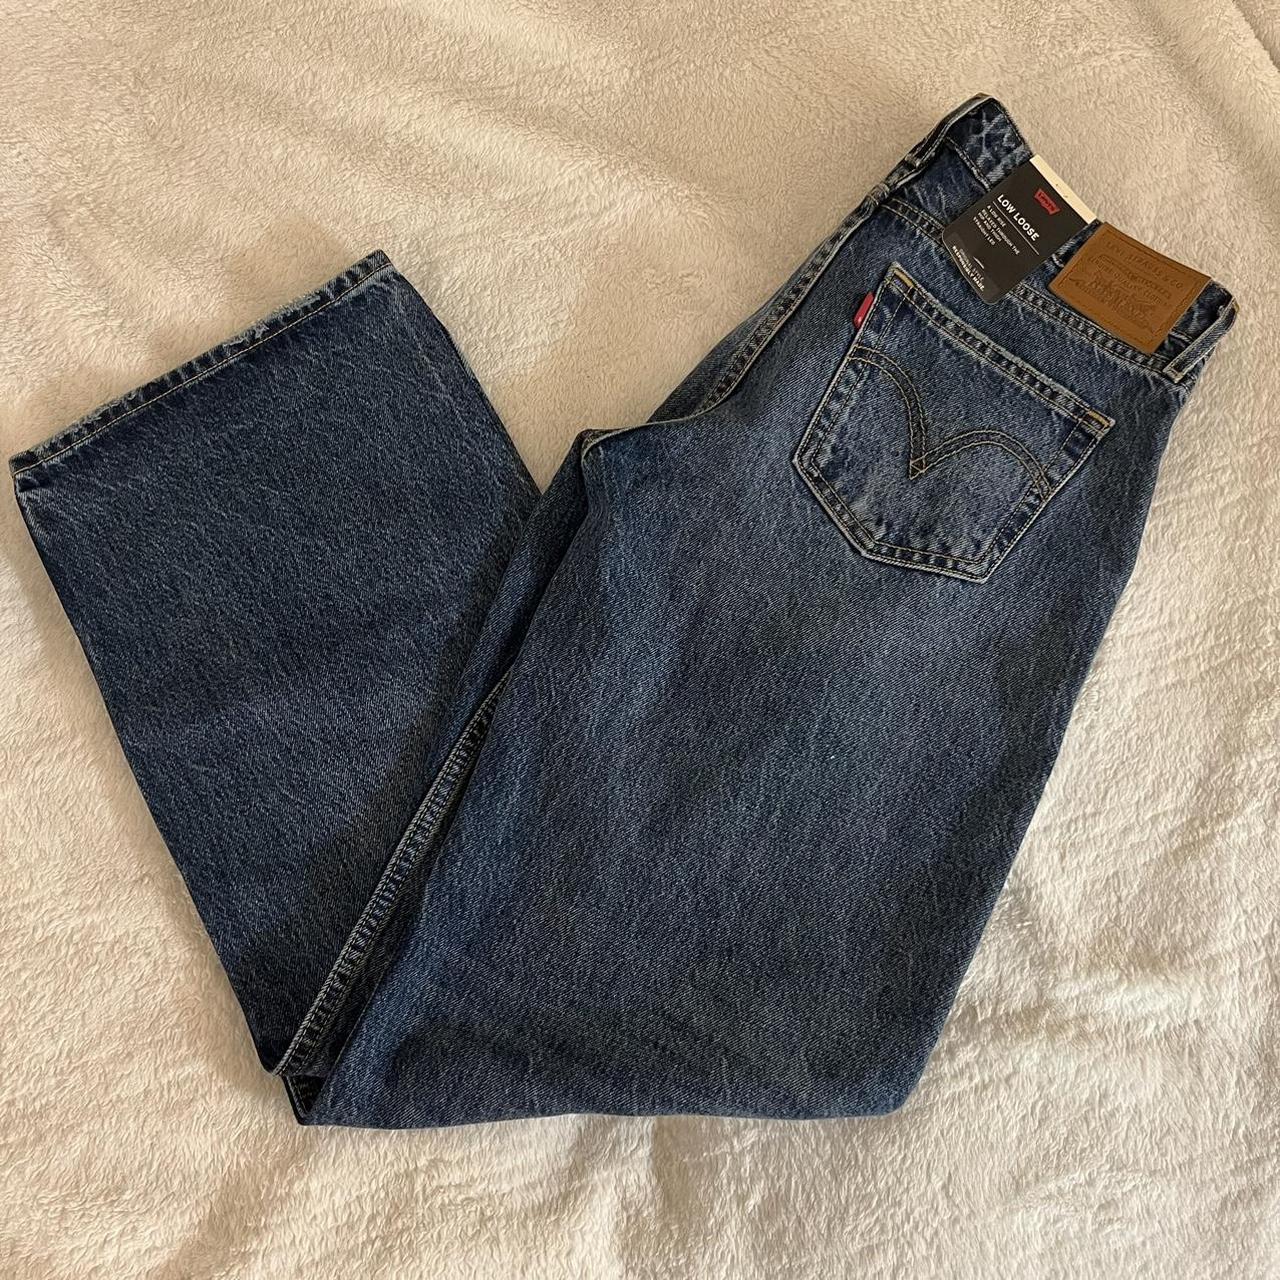 RSQ Loose Straight Jeans No flaws! 29x30 #rsq - Depop